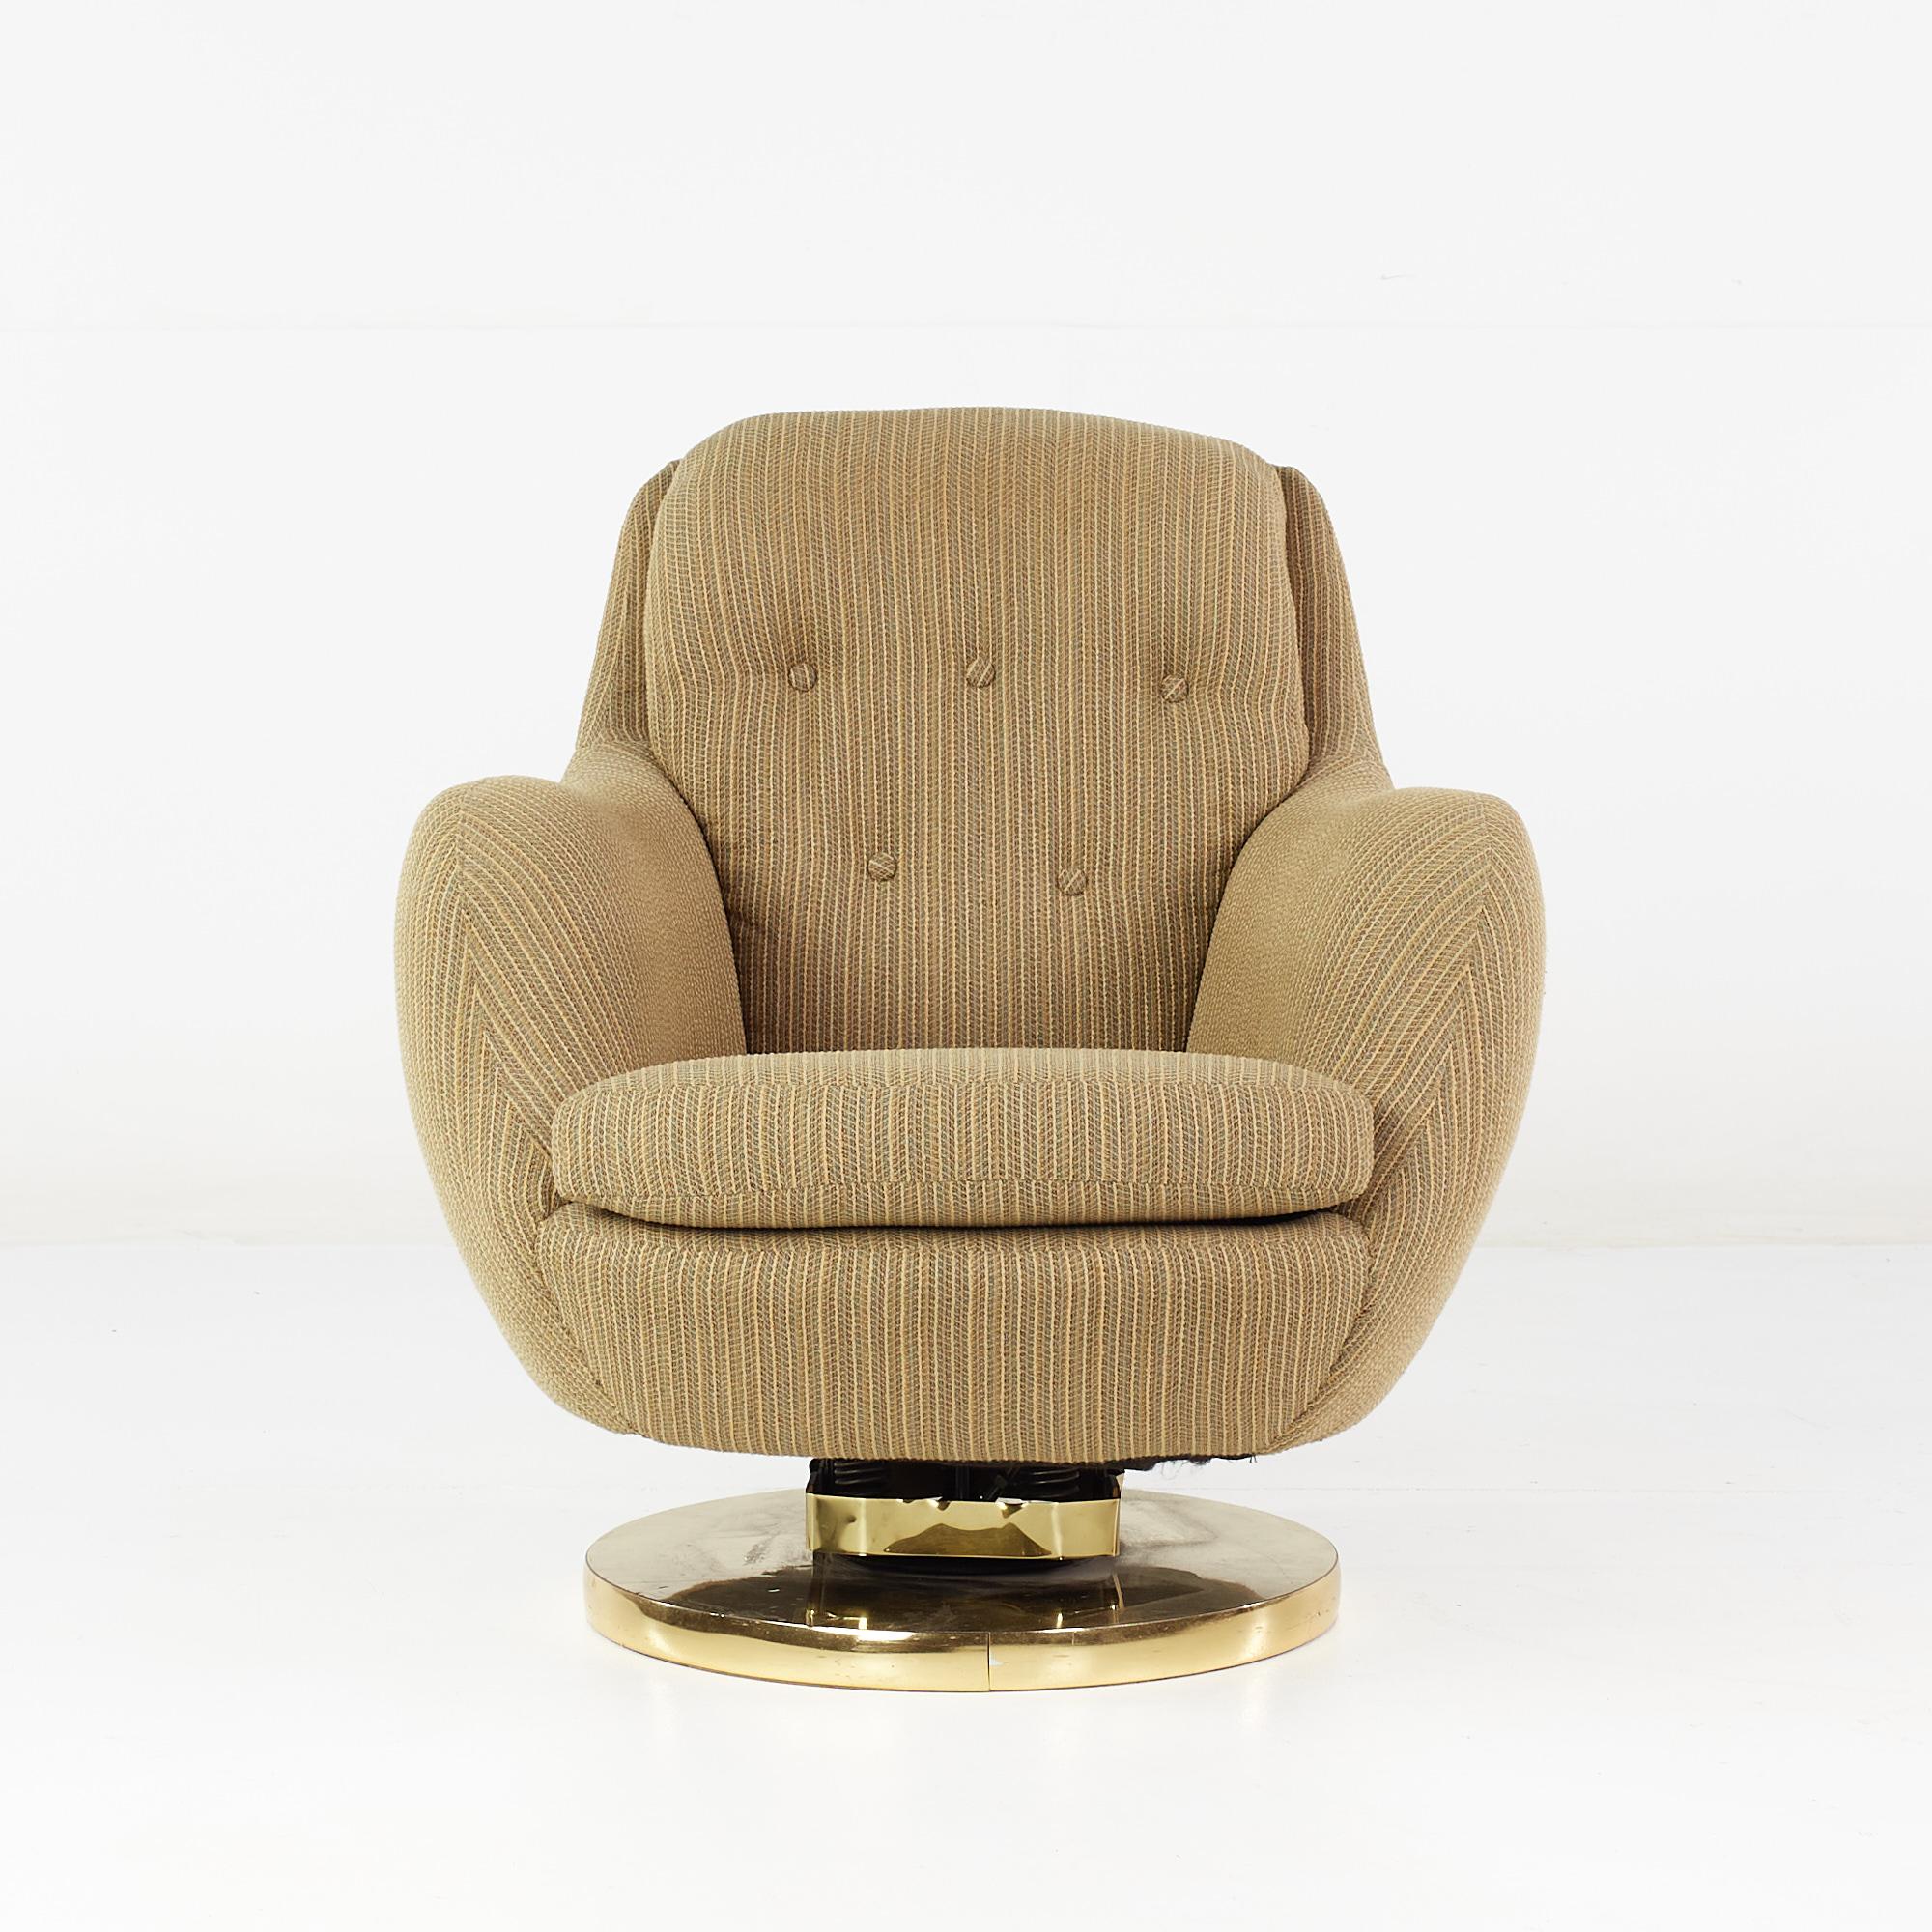 Milo Baughman Style Mid Century Brass Swivel Base Lounge Chair

This chair measures: 30 wide x 33 deep x 32 inches high, with a seat height of 16.5 and arm height/chair clearance of 23 inches

All pieces of furniture can be had in what we call